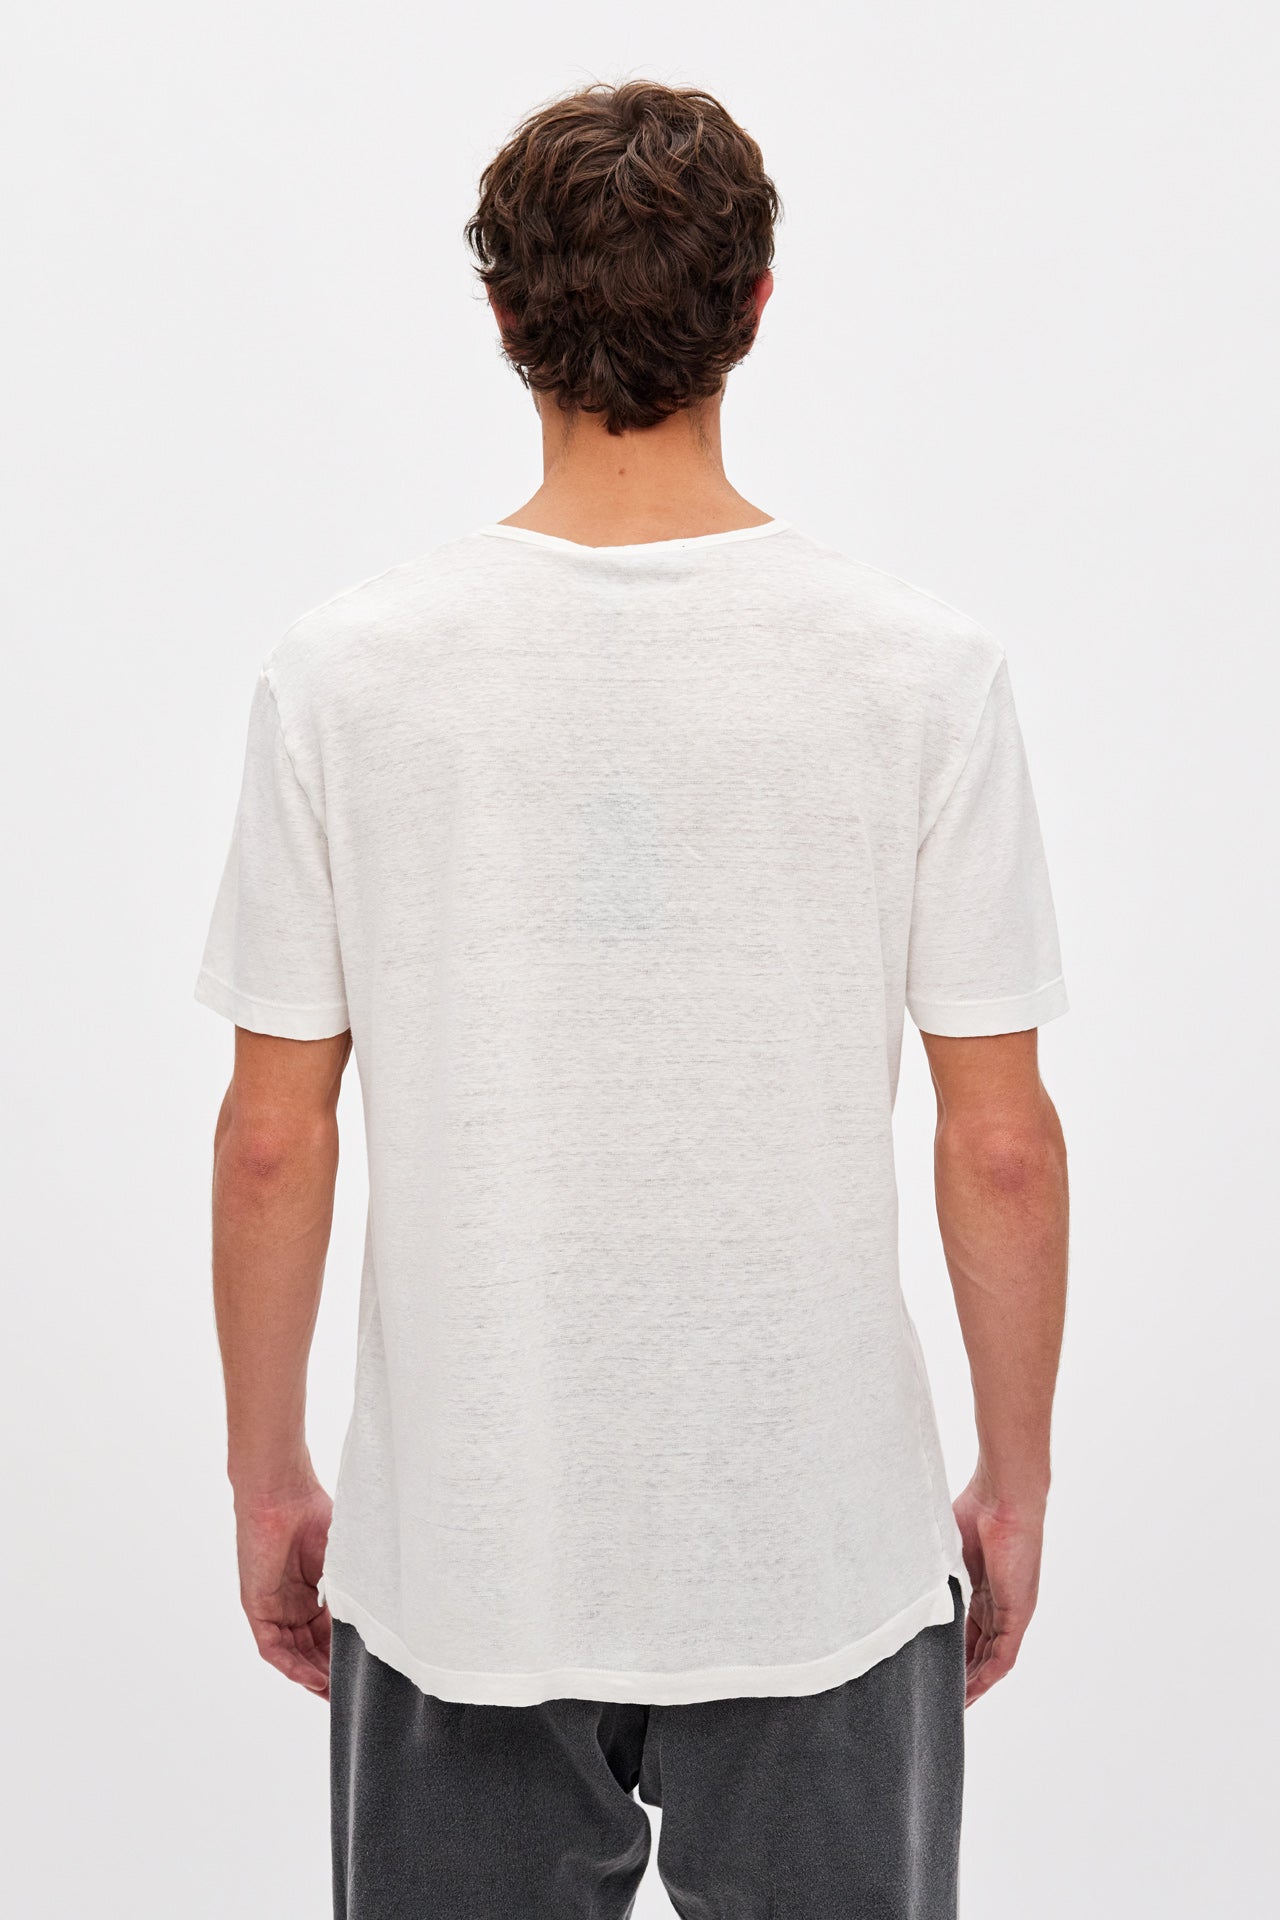 Shortsleeved T-shirt in Loose Line WHITE